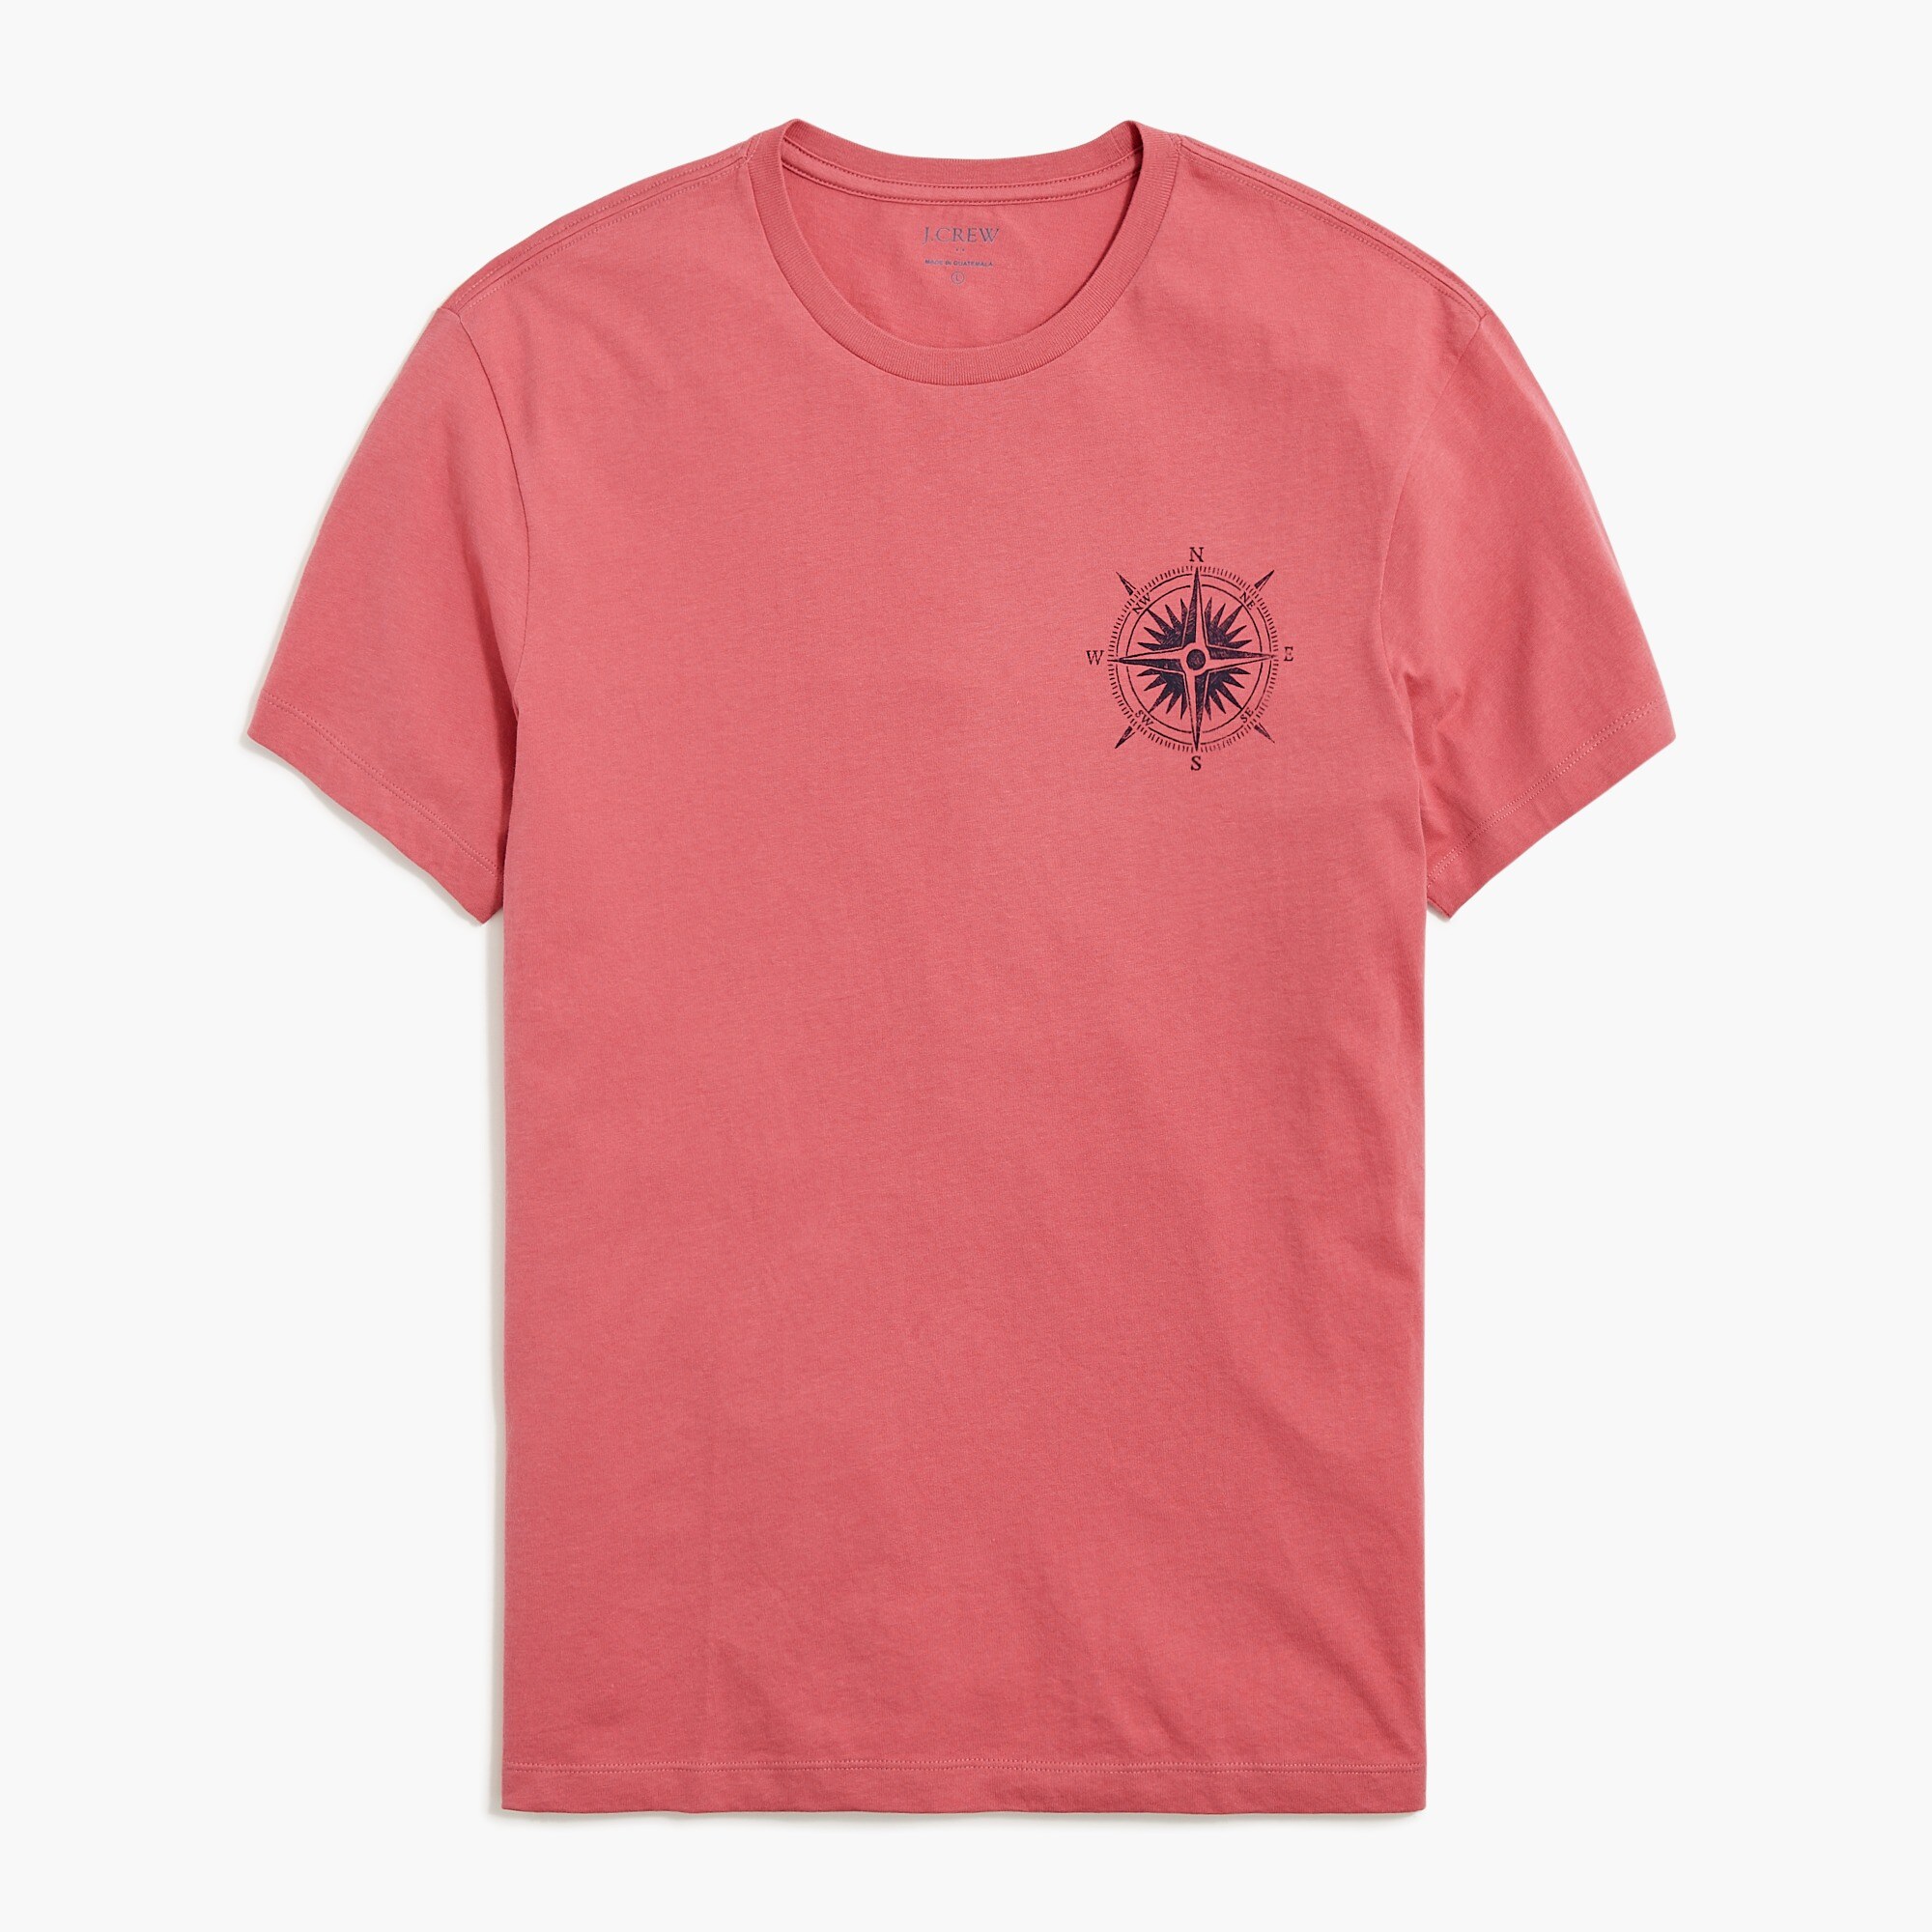 mens Compass graphic tee